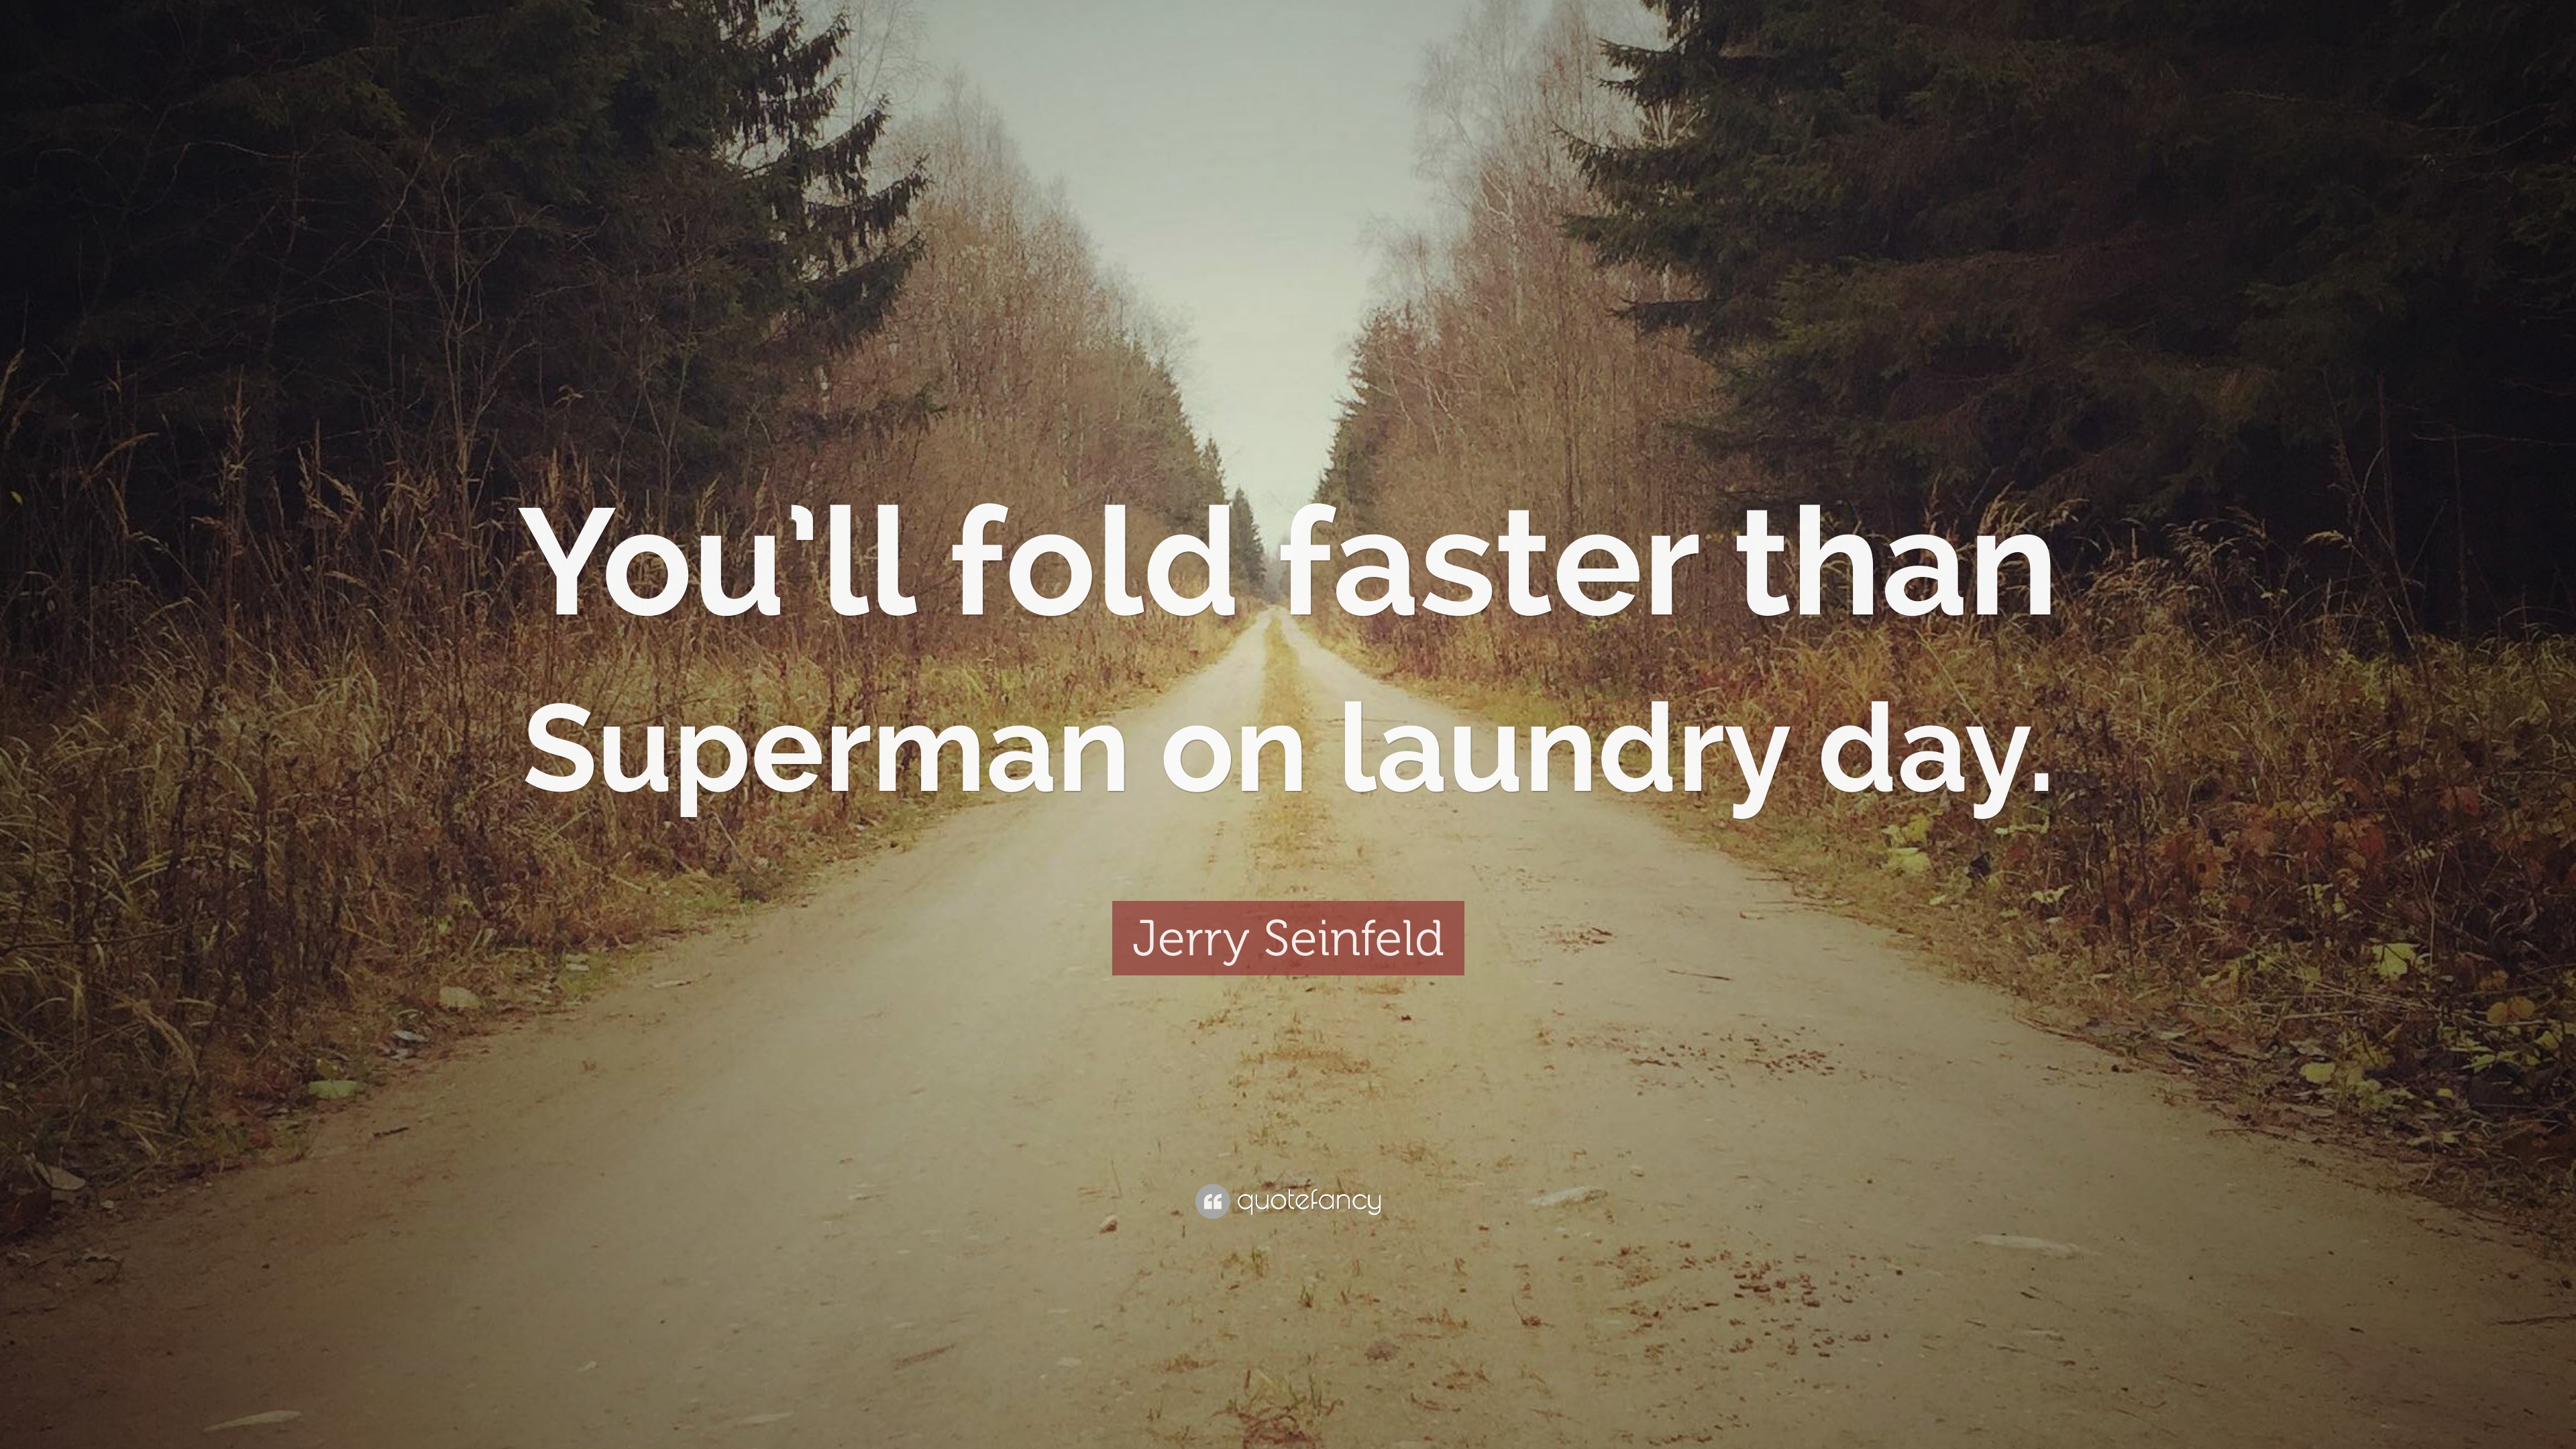 Jerry Seinfeld Quote: “You'll fold faster than Superman on laundry